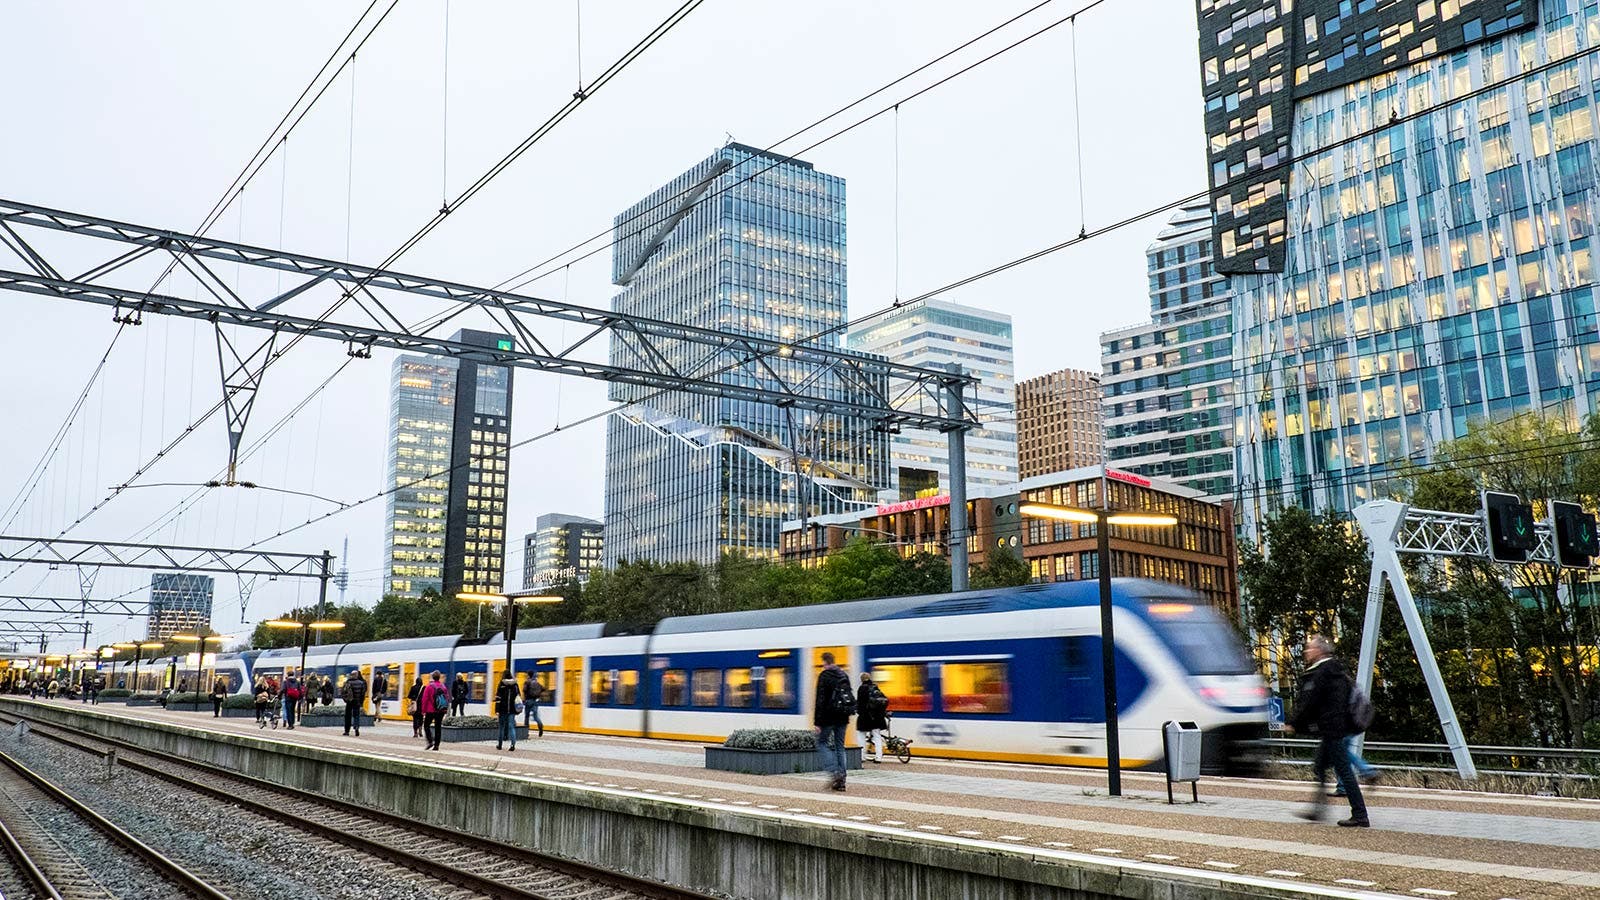 The Dutch rail network is one of the busiest in the world